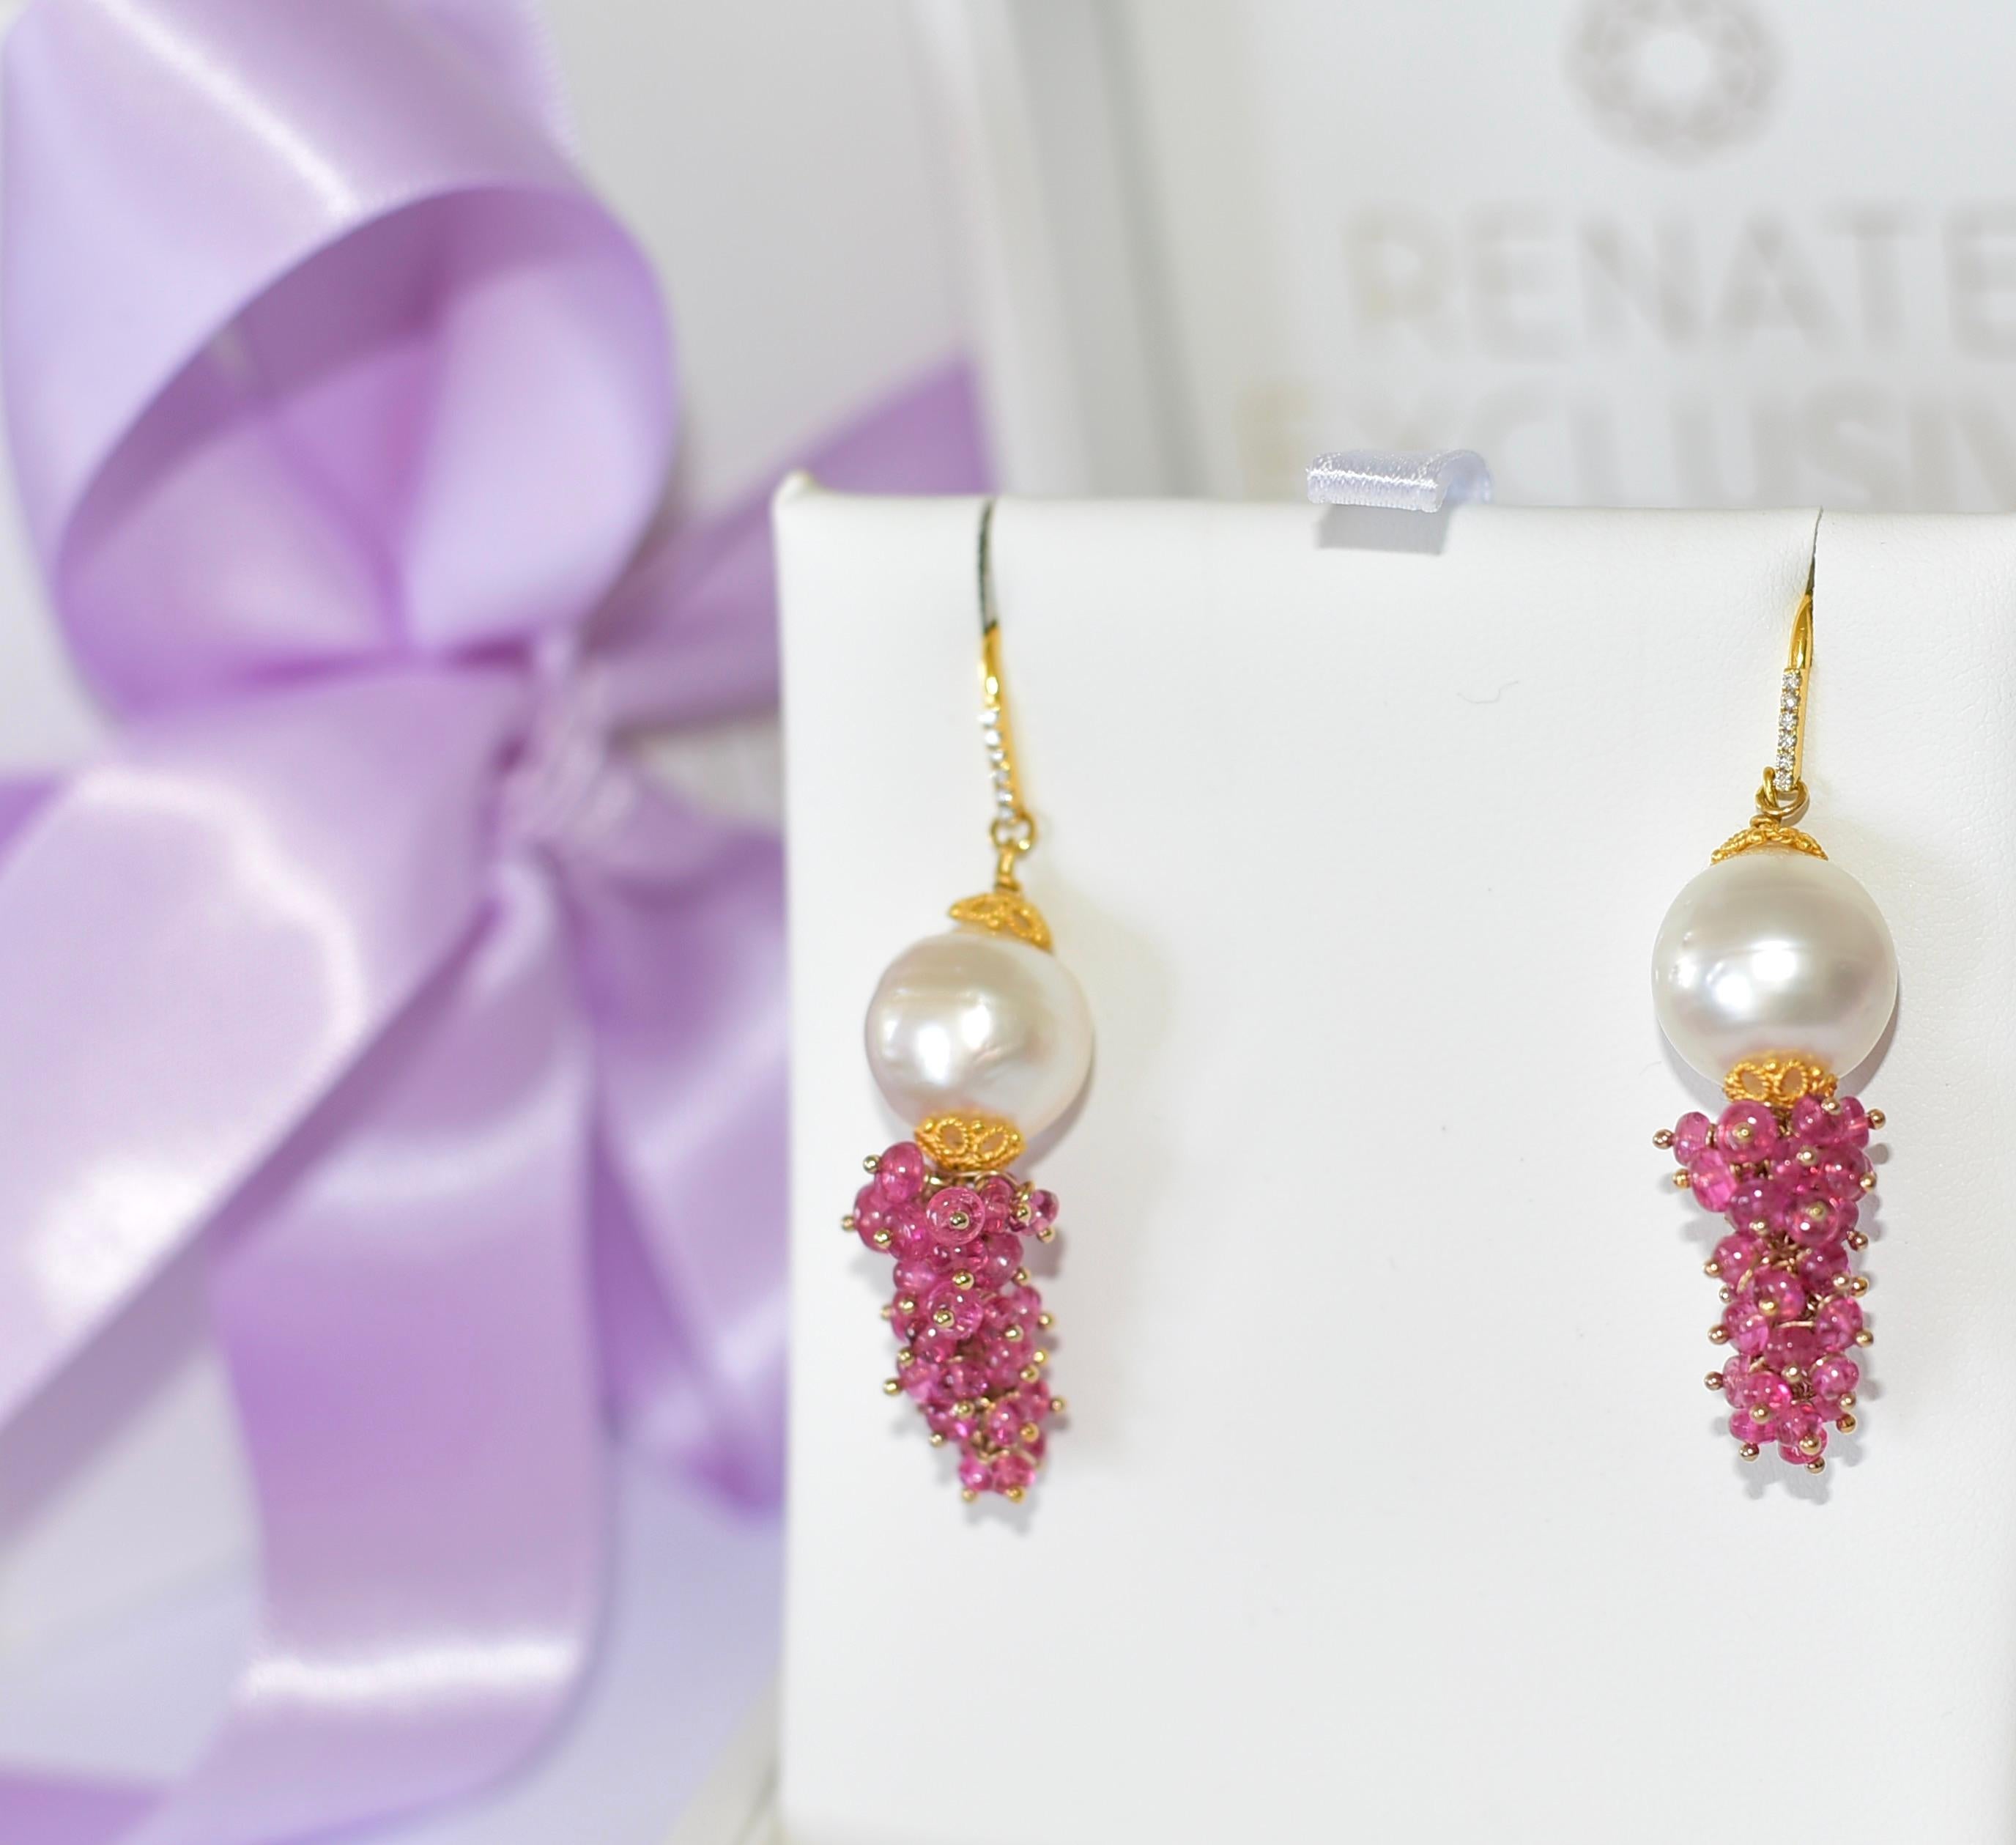 Neon Hot Pink Burmese Jedi Spinel, South Sea Pearl Earrings in 14K Solid Gold In New Condition For Sale In Astoria, NY